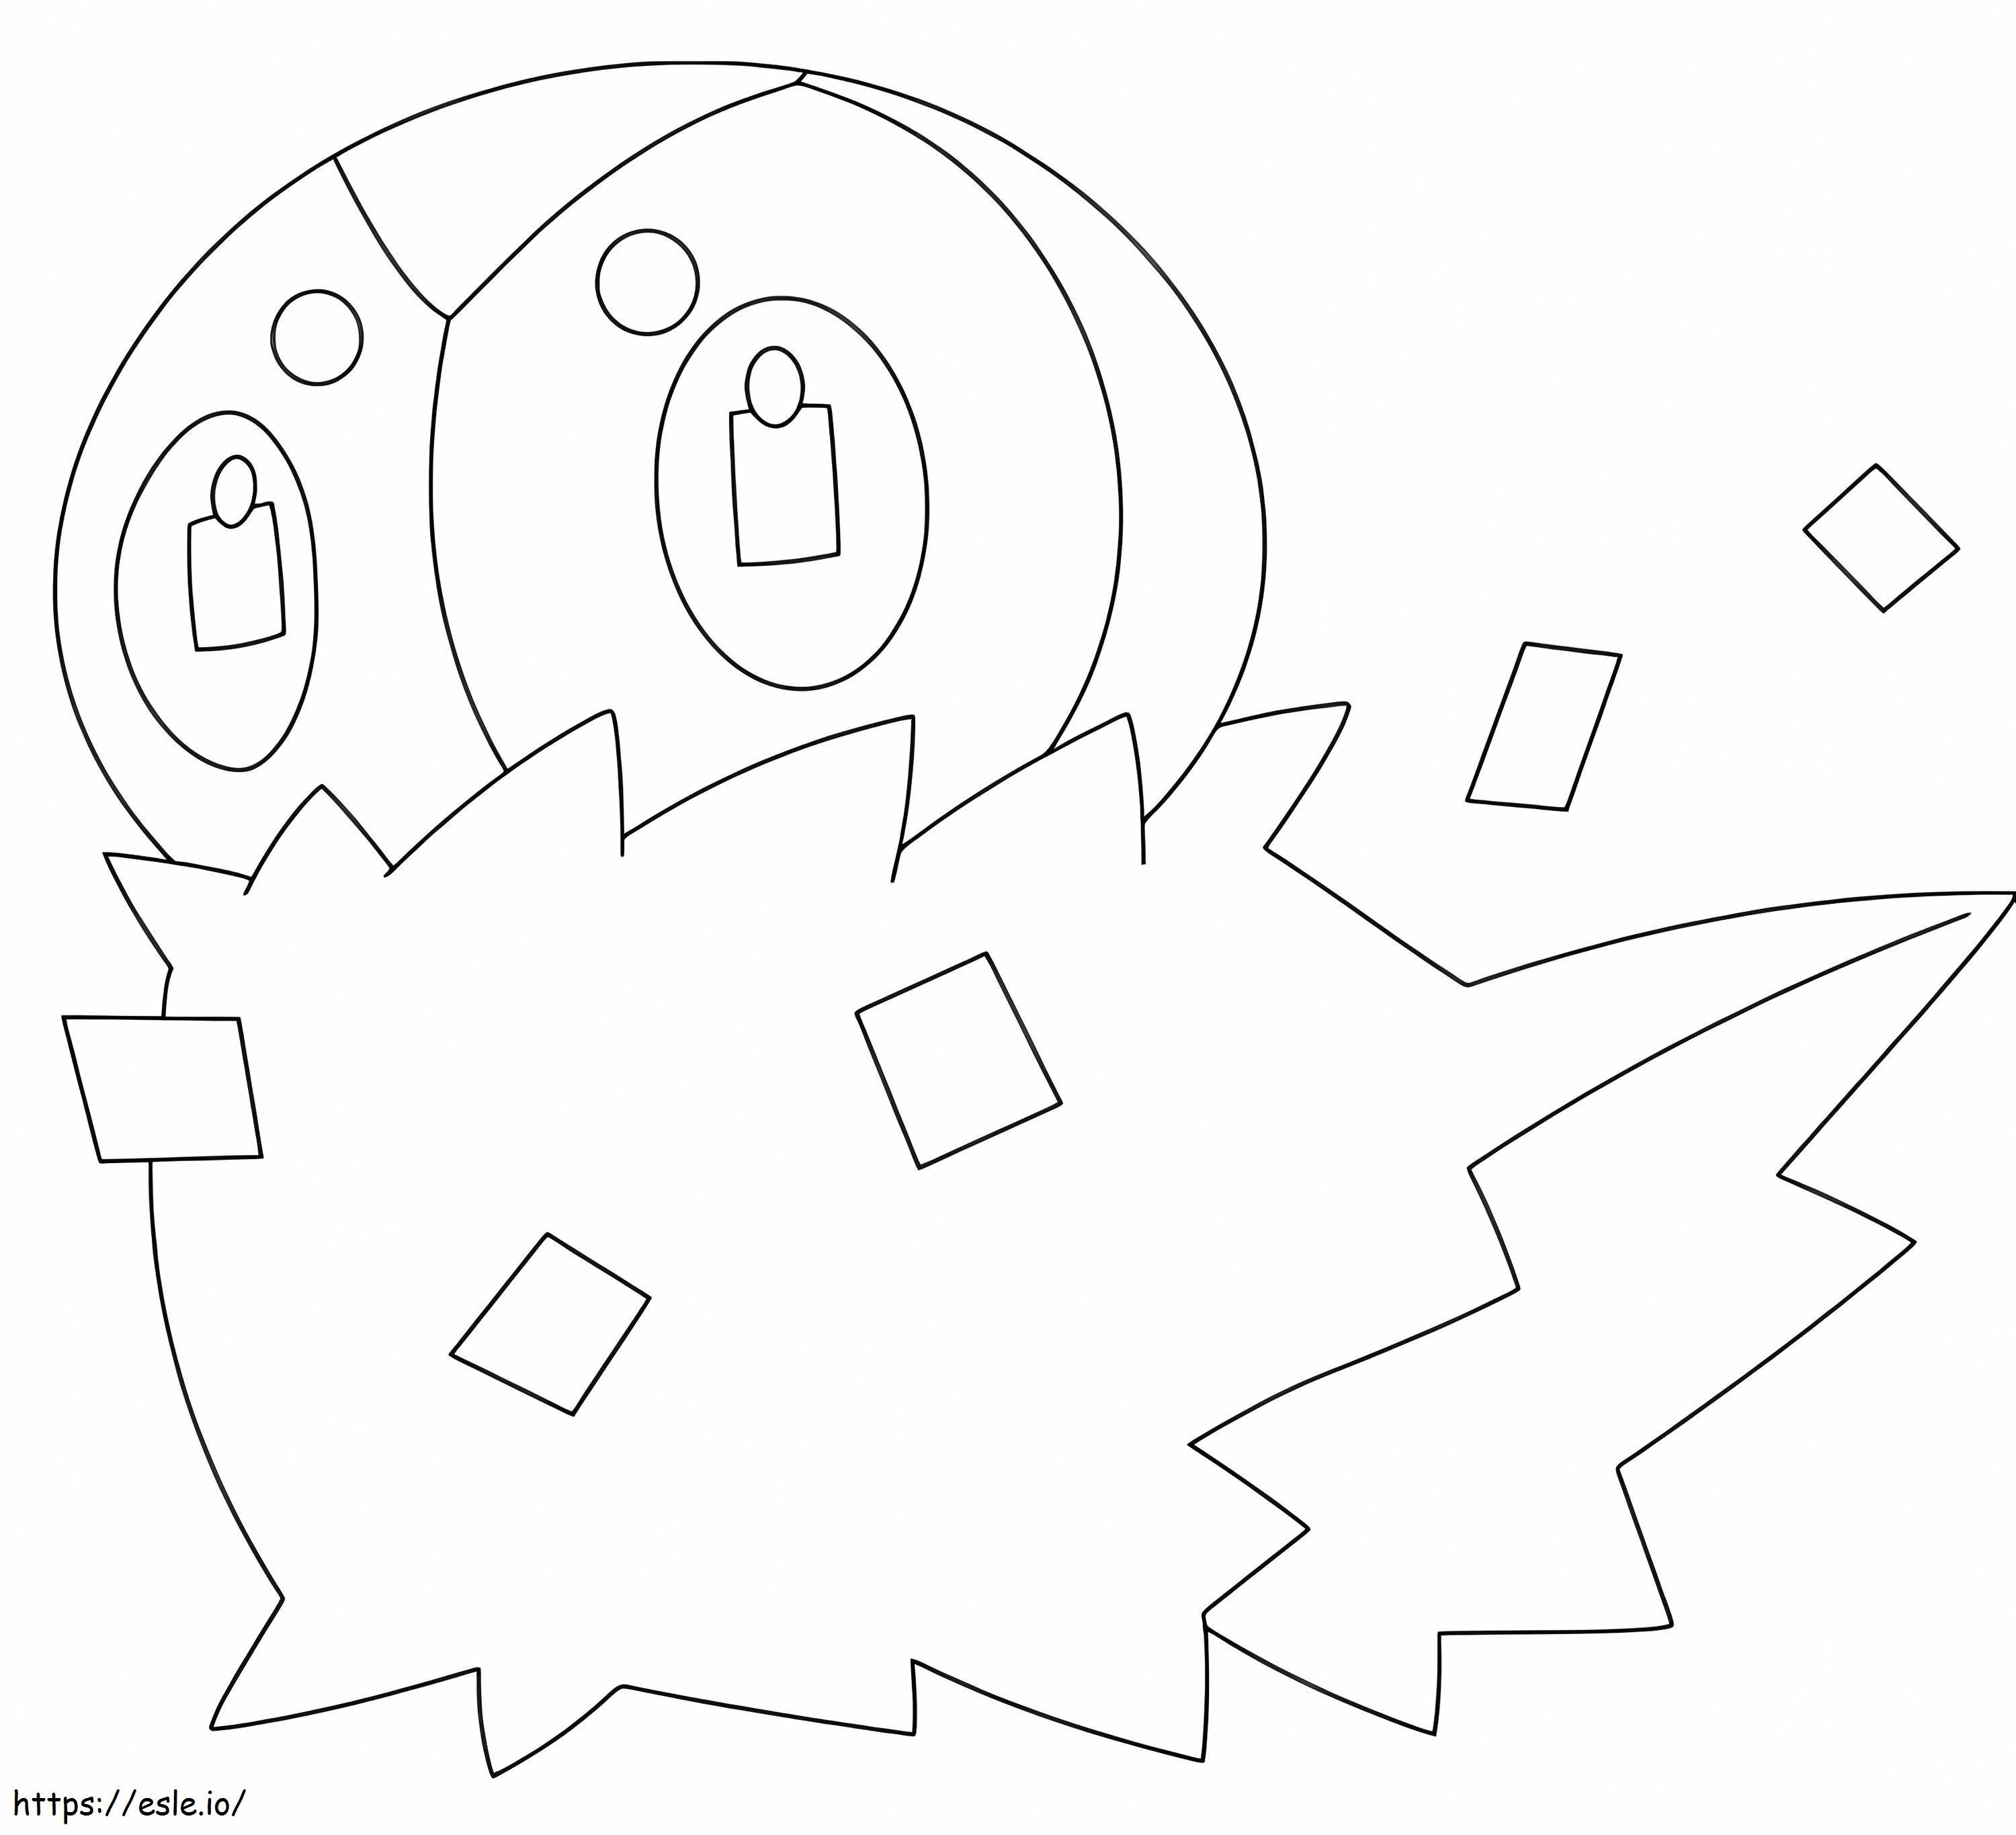 Spewpa 1 coloring page